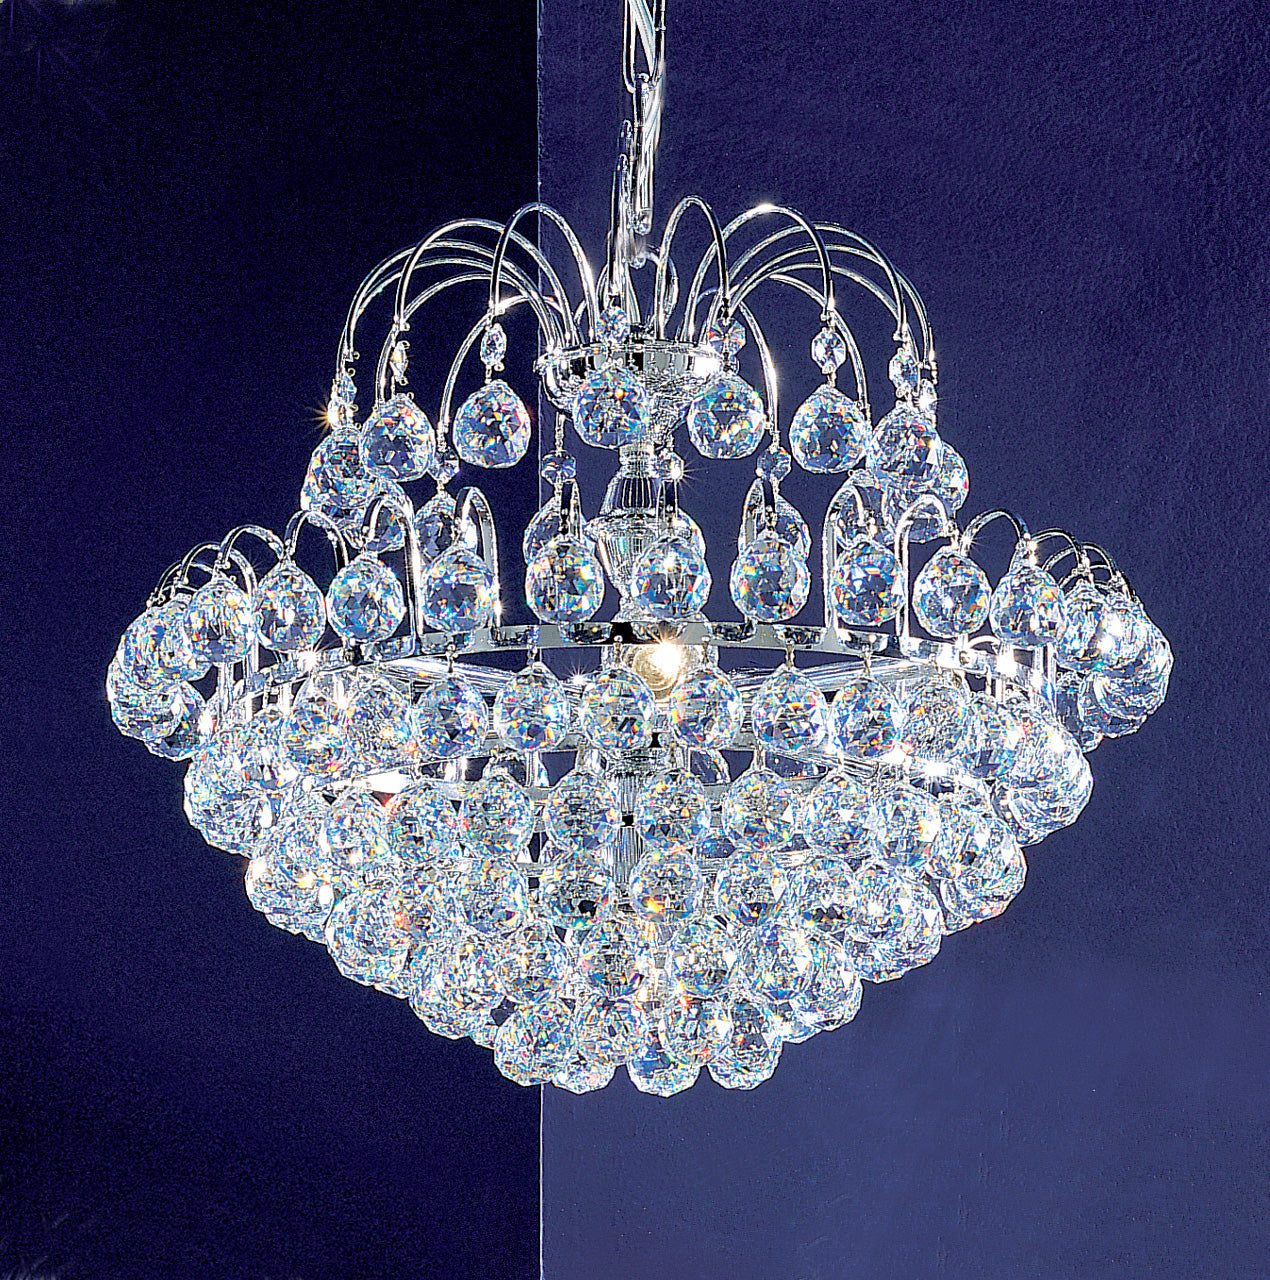 Classic Lighting 1895 CH SC Diamante Crystal Chandelier in Chrome (Imported from Spain)